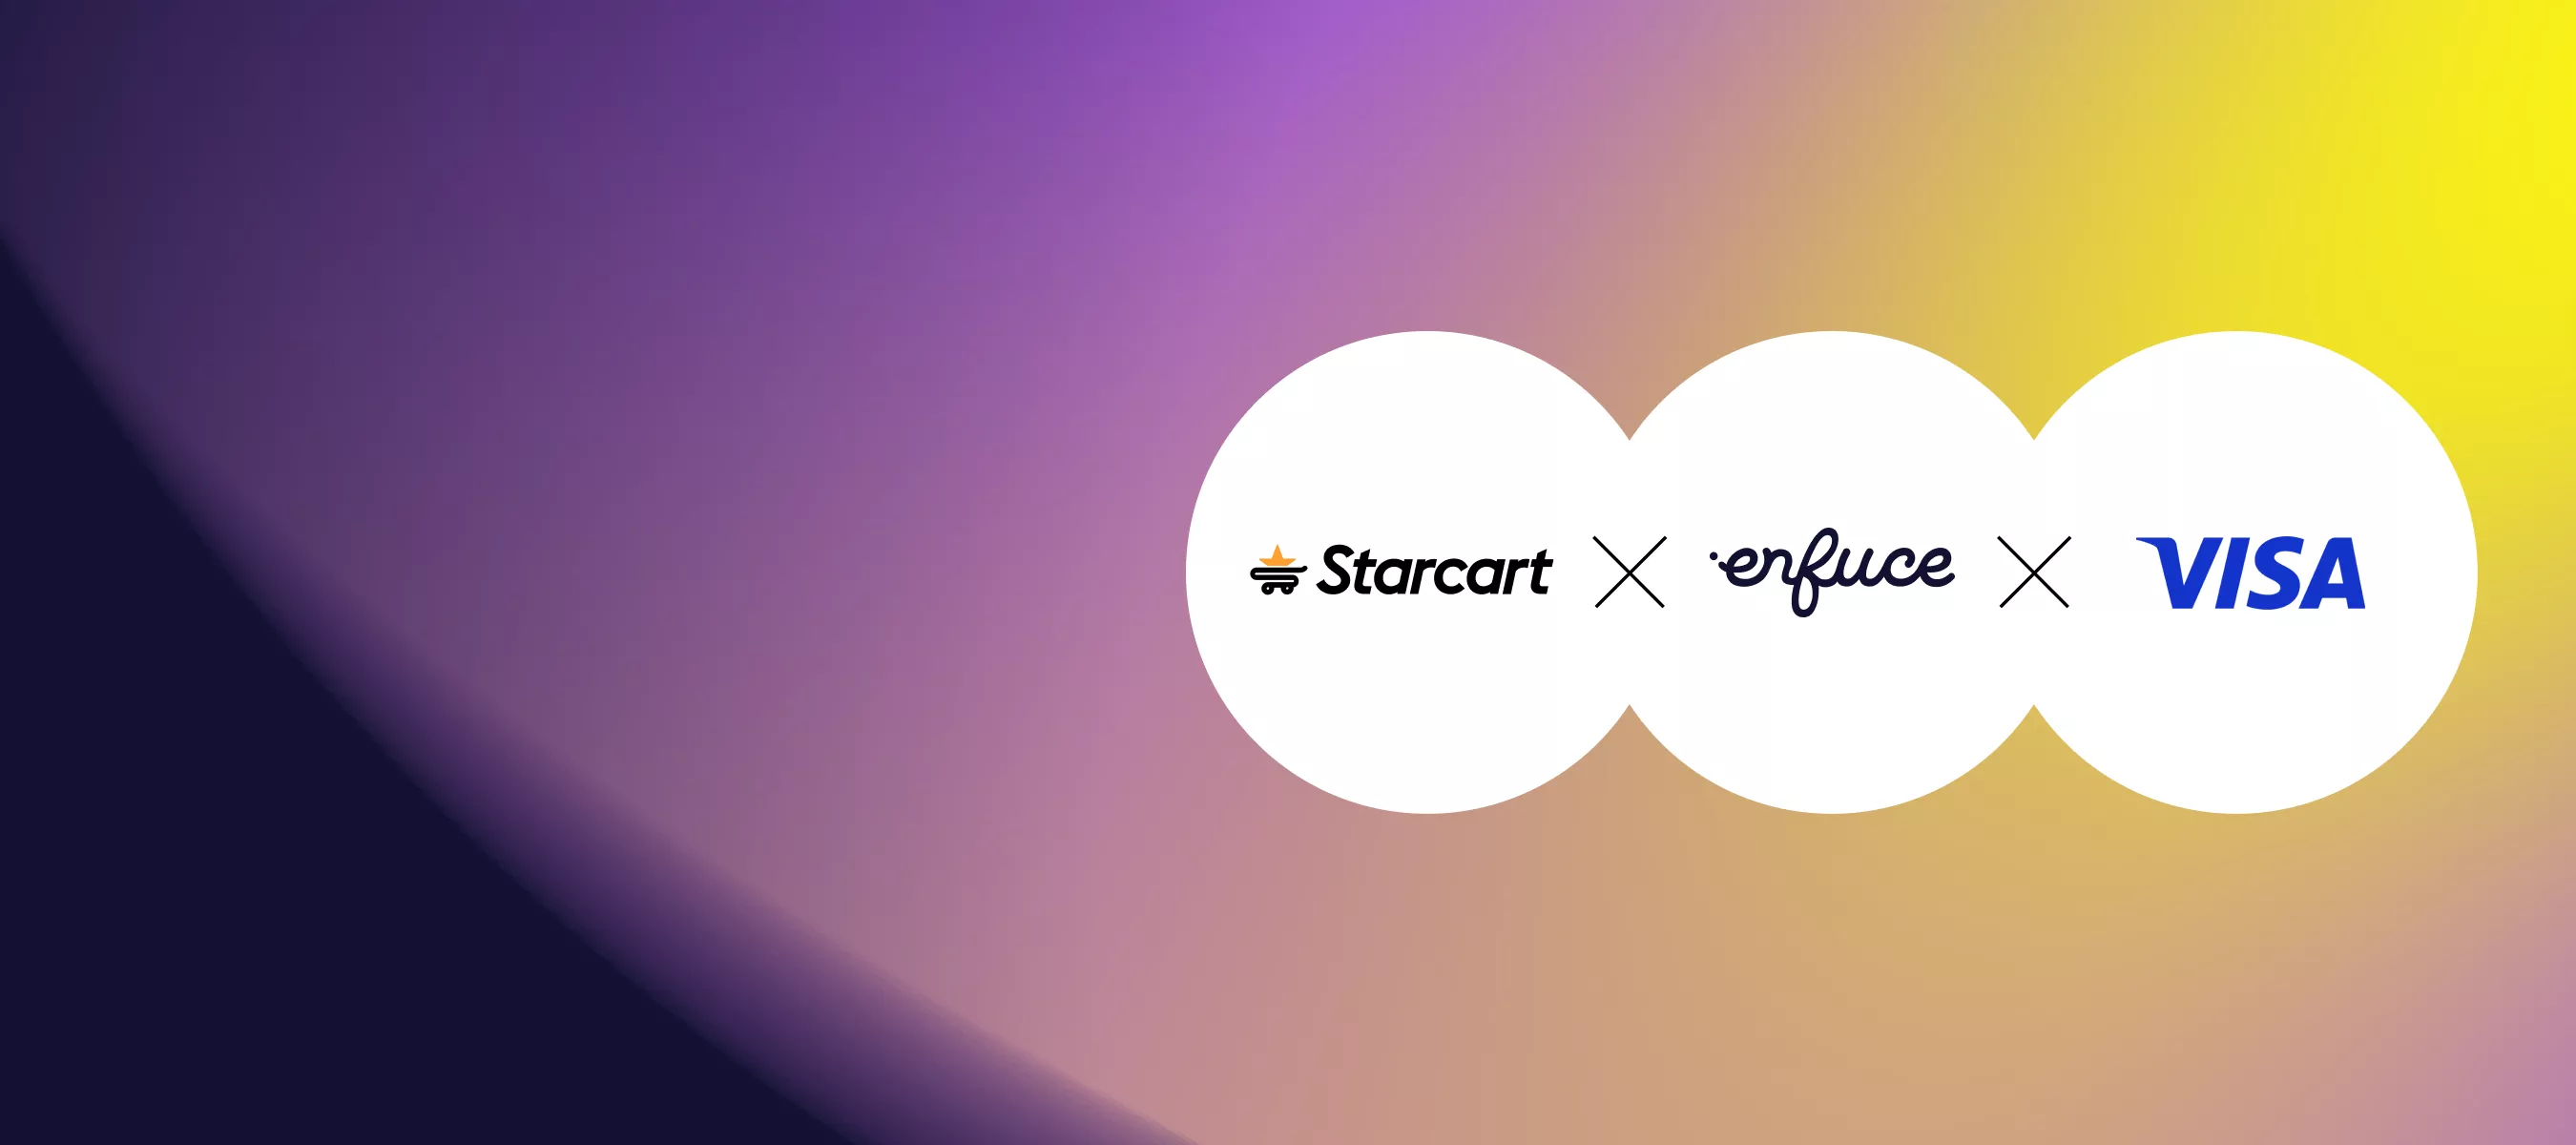 Online shopping reimagined: Learn how Starcart and Enfuce transform the online shopping experience with Visa